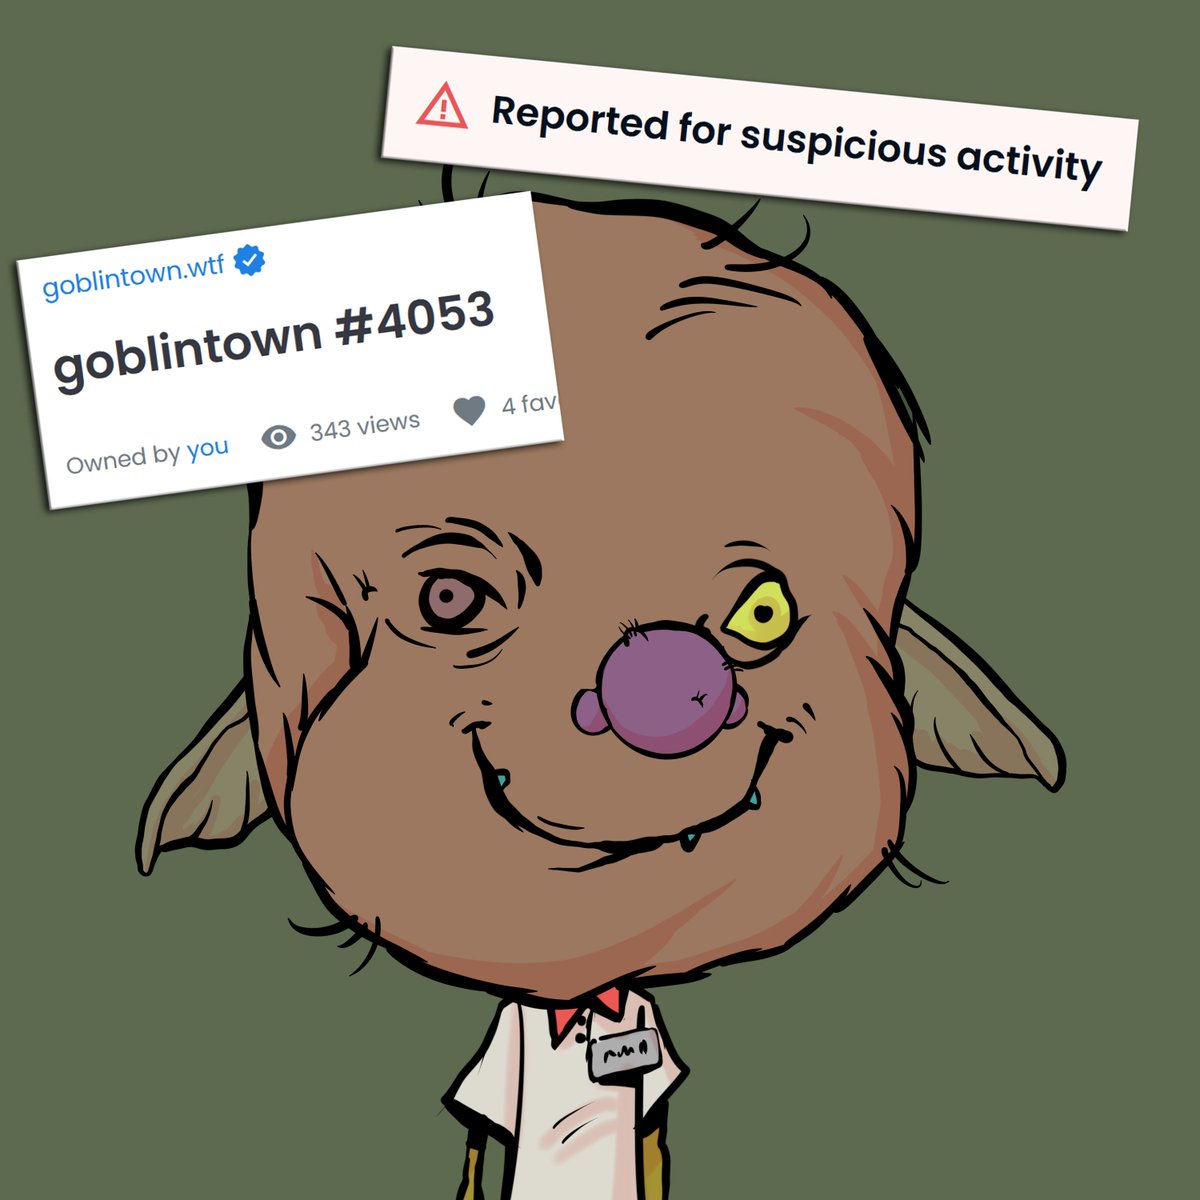 Was browsing nftx and found this awesome @McGoblinBurger employee! I was happy to welcome this little fella in my home, to find out I didn't pay attention and noticed he was flagged for suspicious activity. You know what? I don't care. I'll make him my forever @goblintownwtf PFP